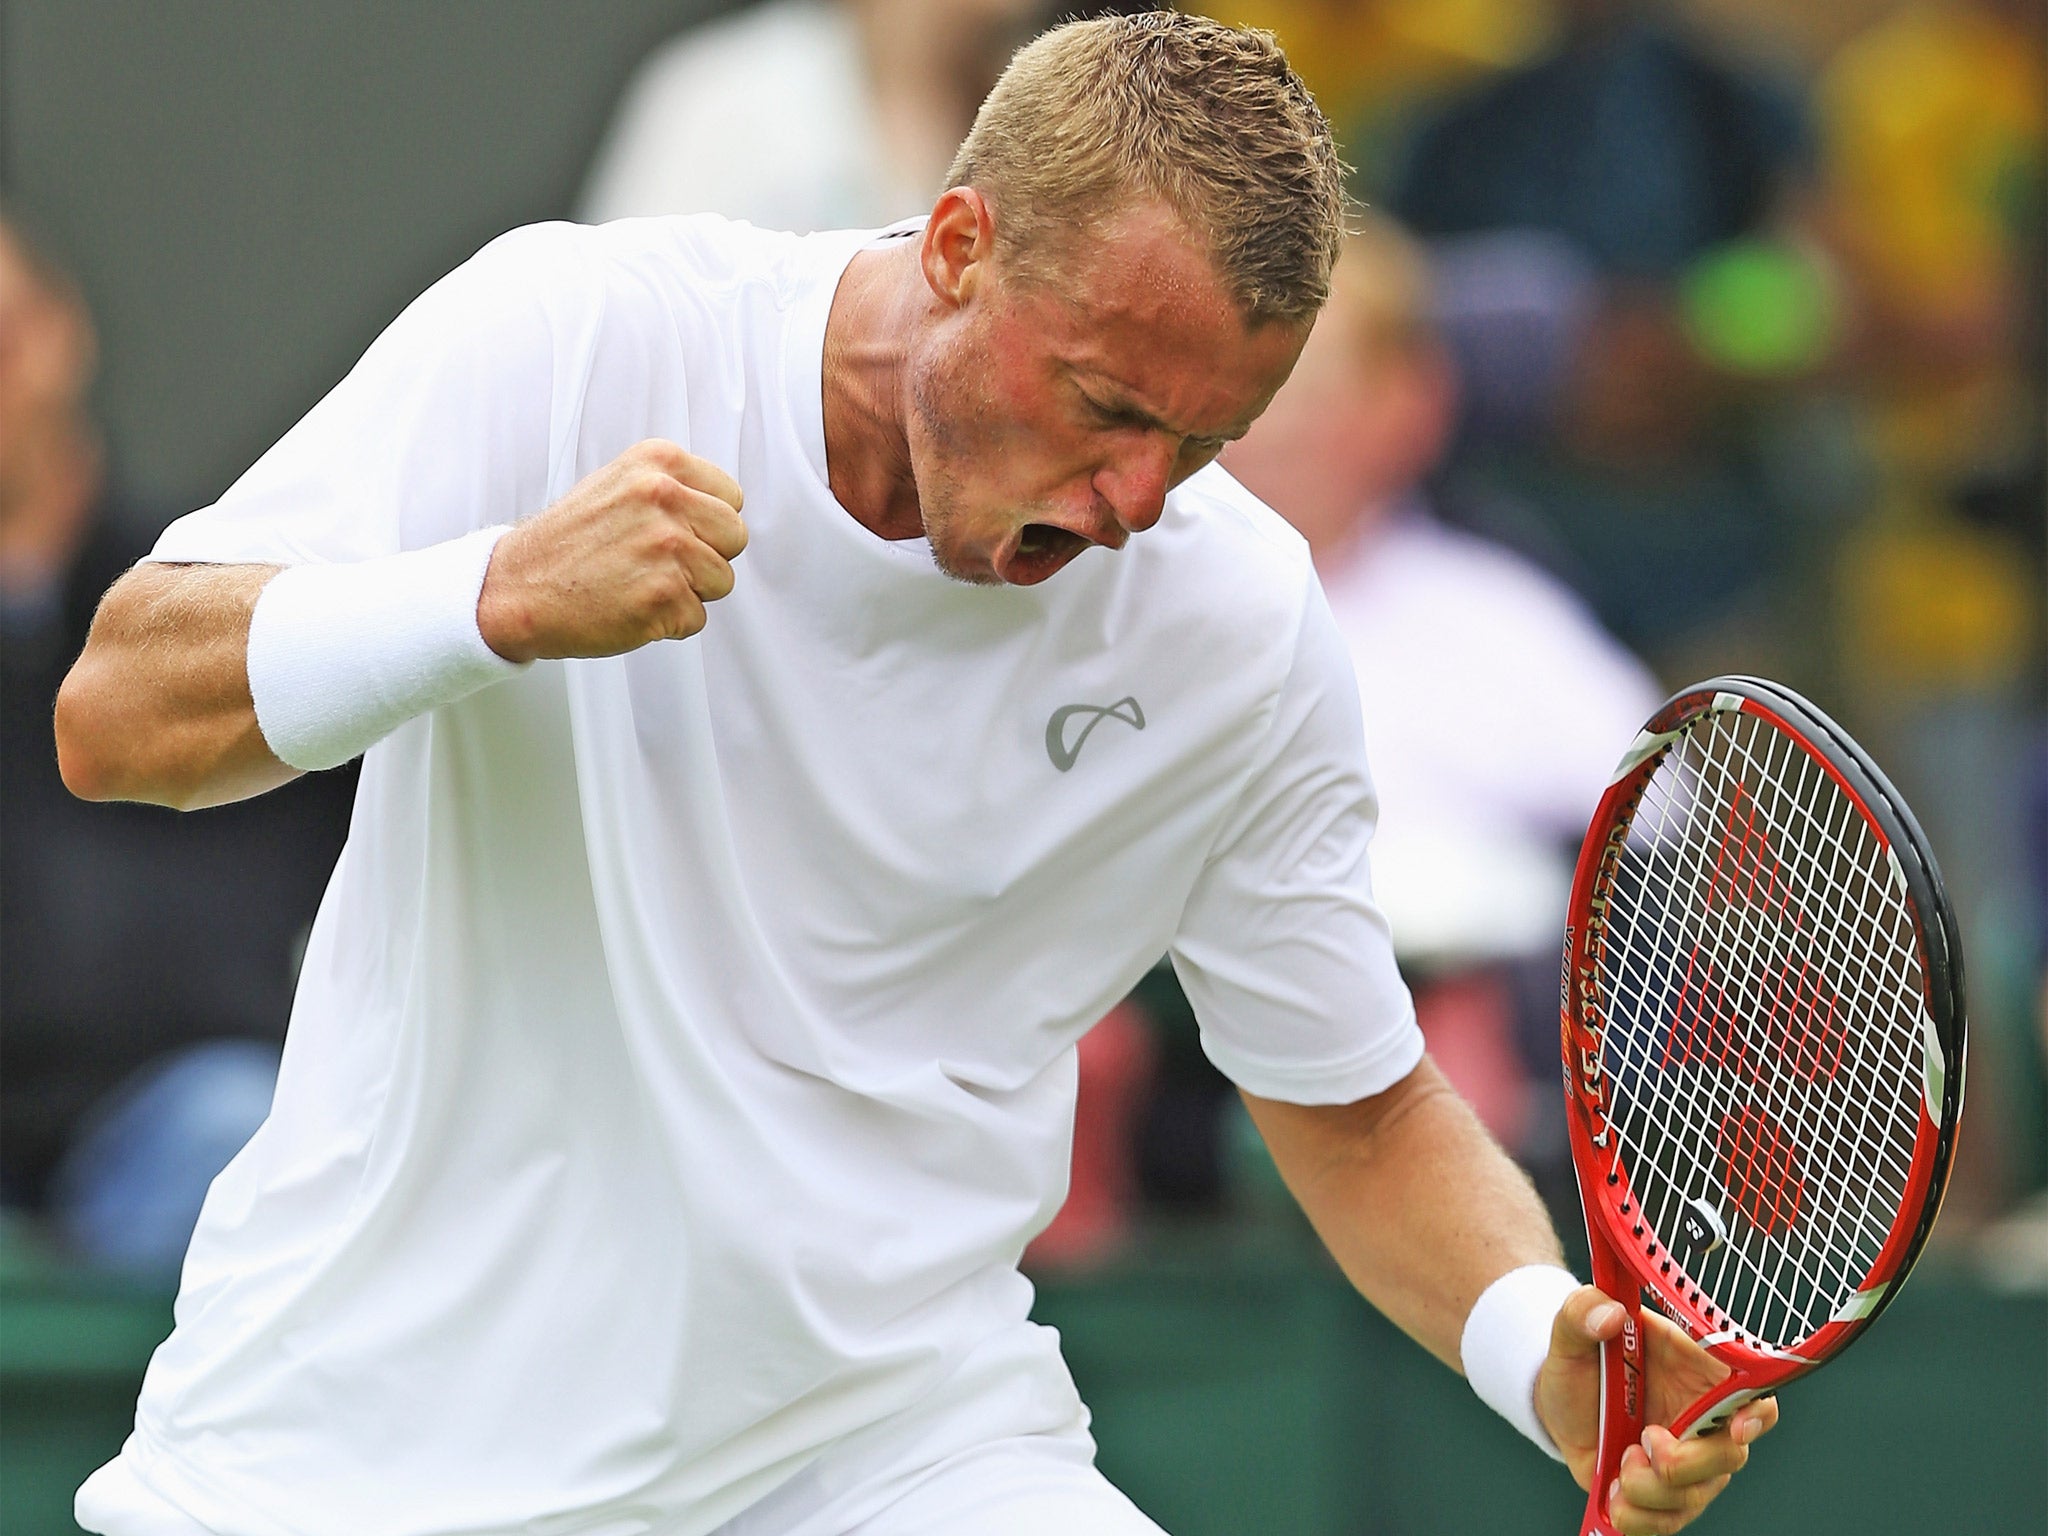 Lleyton Hewitt’s career has lately been interrupted by a series of injuries and operations